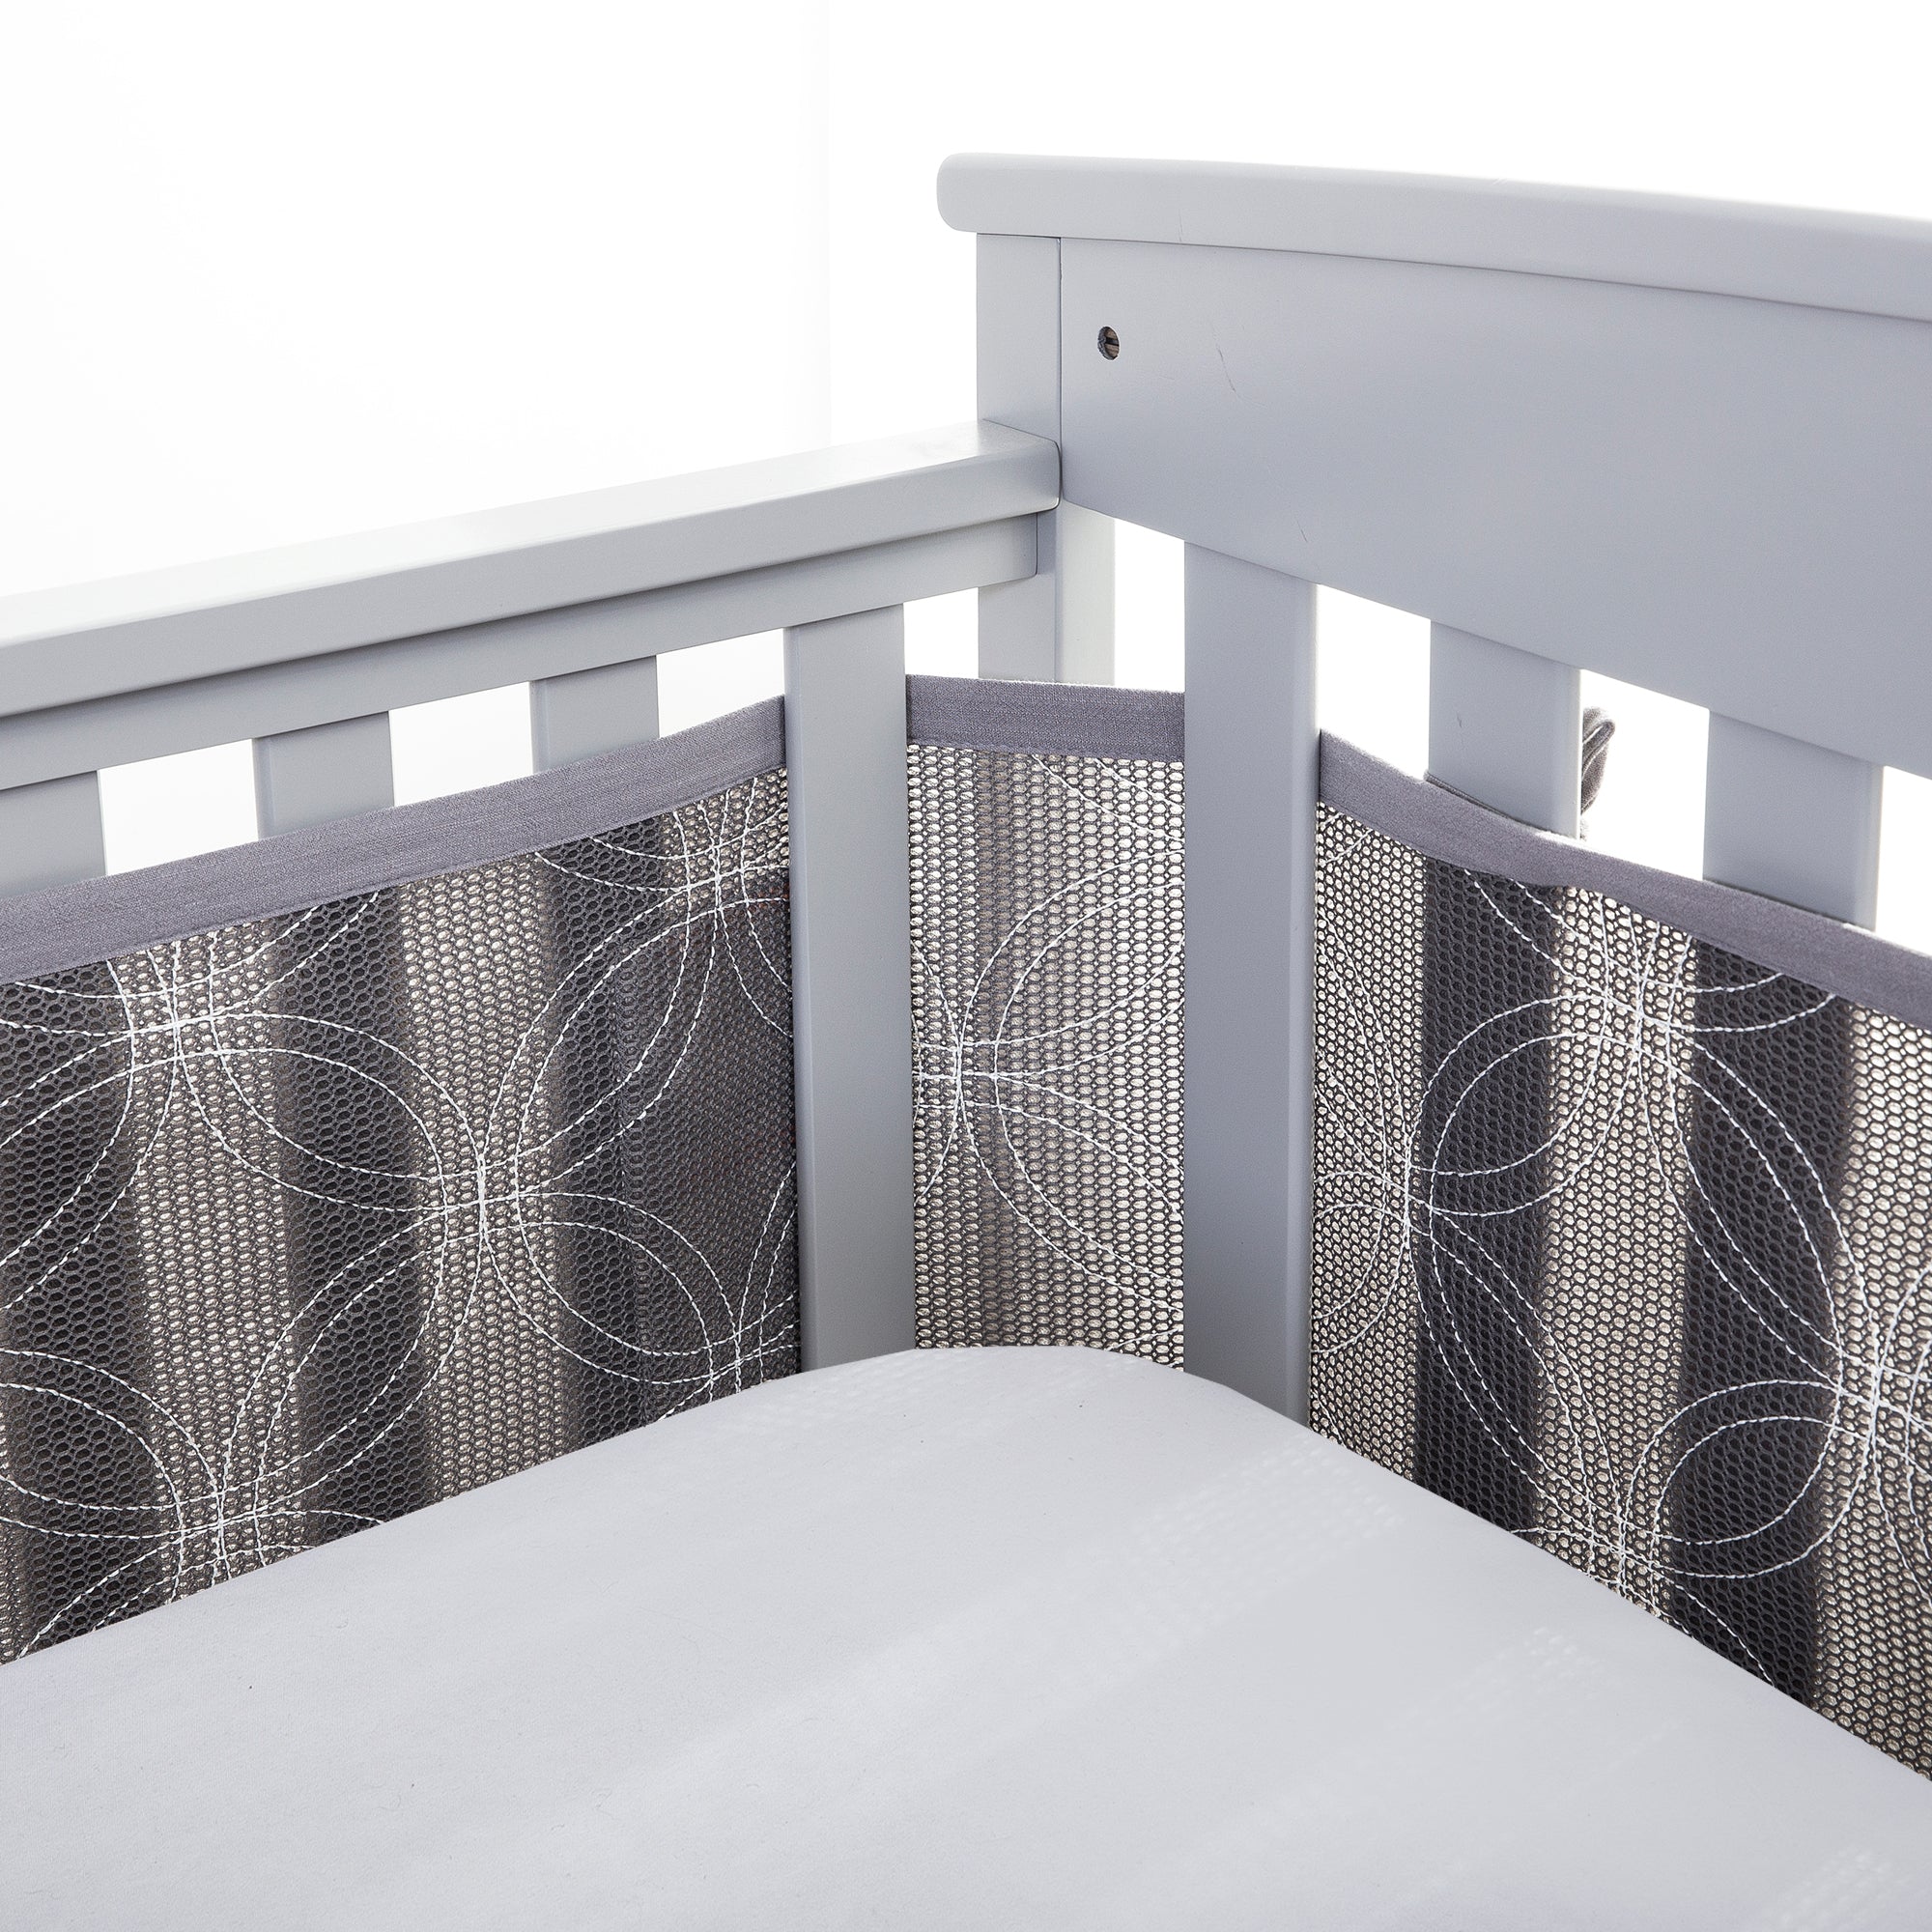 Breathable™ Mesh Liner for Full-Size Cribs, Deluxe 4mm Mesh, Gray Links  (Size 4FS Covers 3 or 4 Sides)